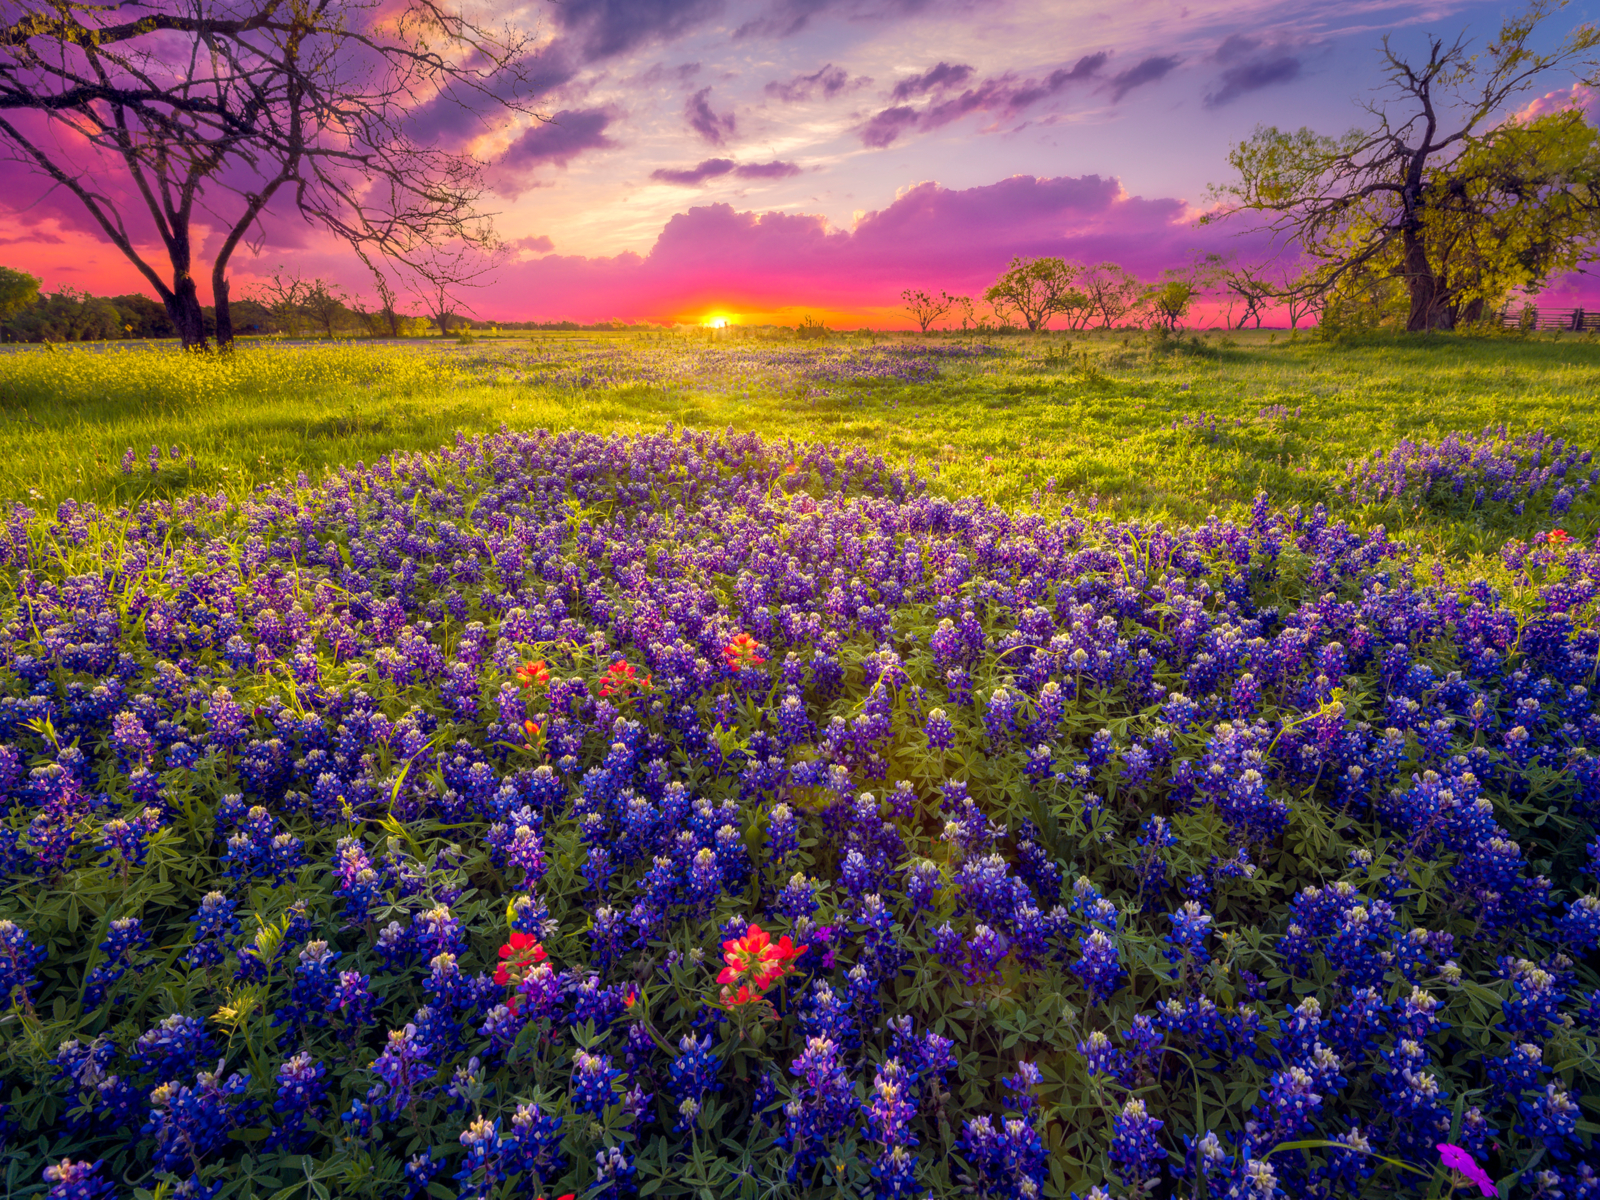 Texas wildflower season, one of the cool things to do in Texas, viewed at dawn